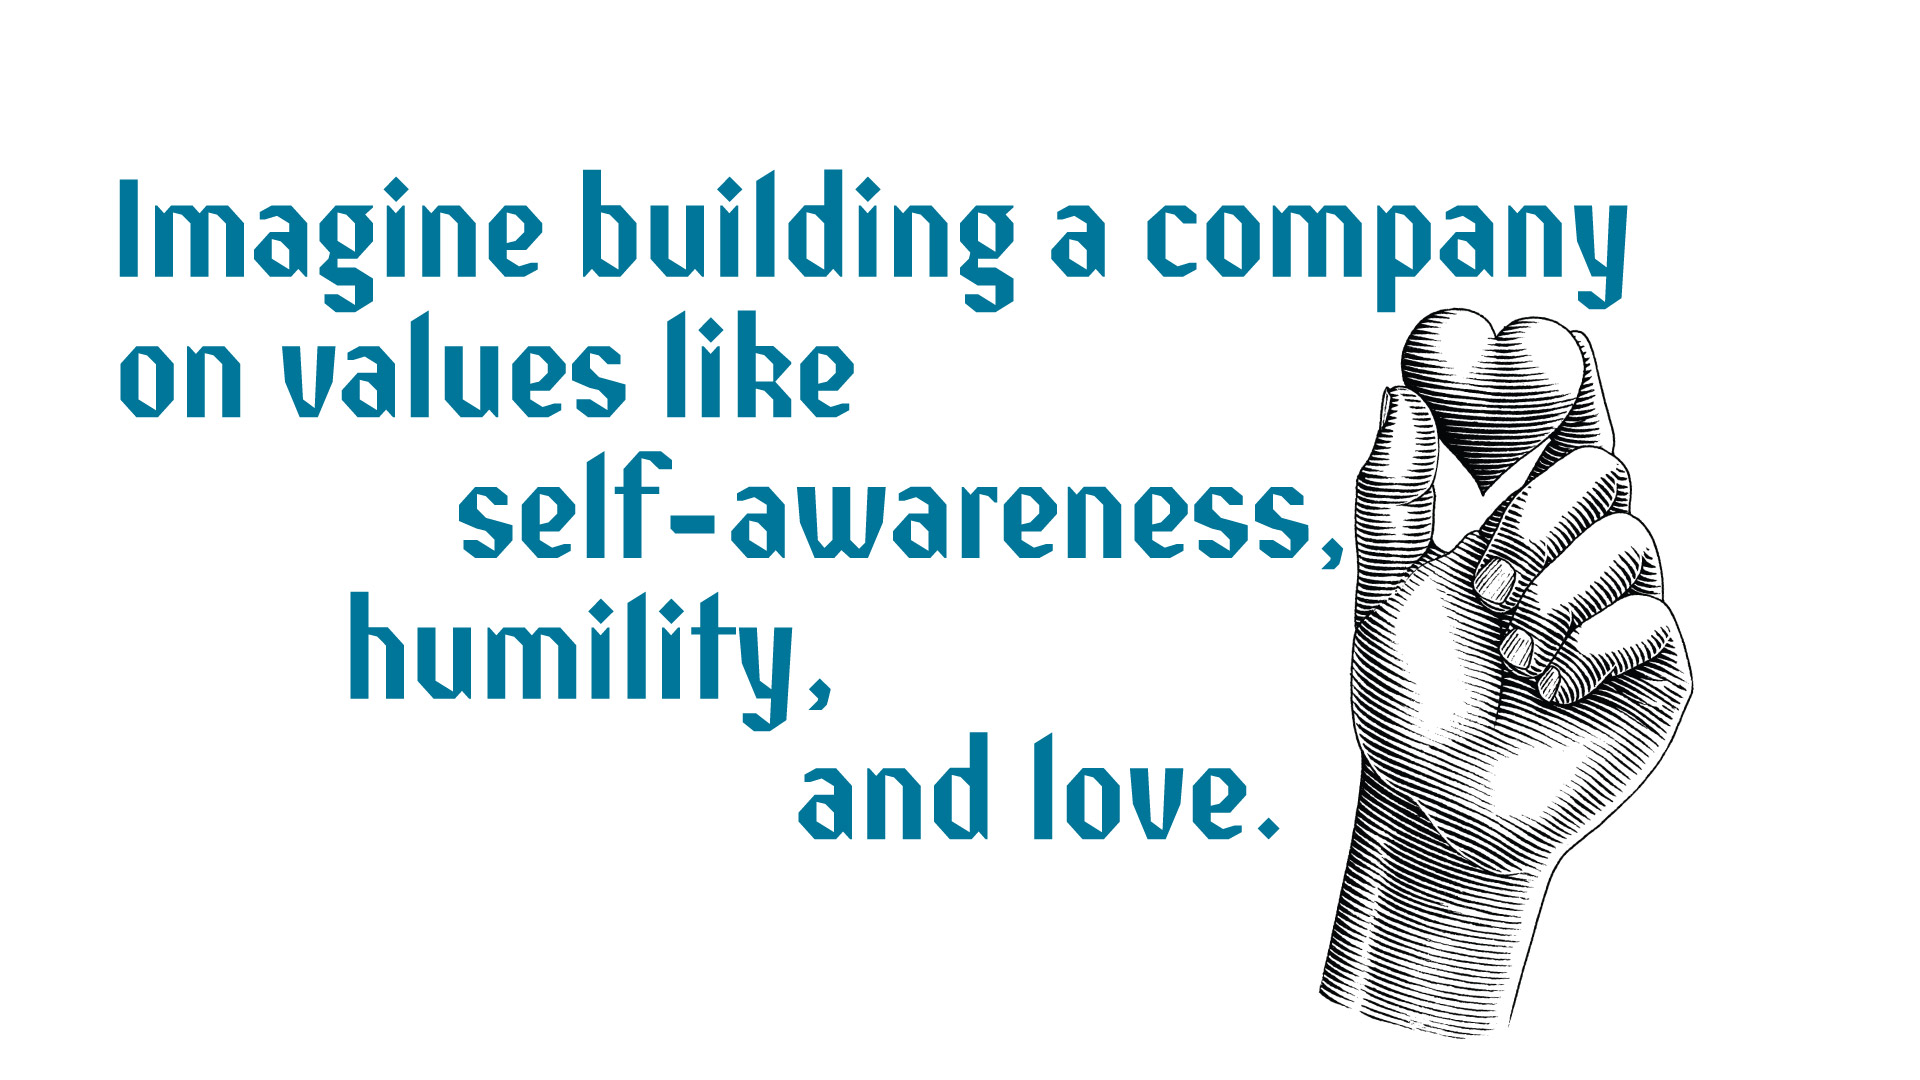 Imagine building a company on values like self-awareness, humility, and love.